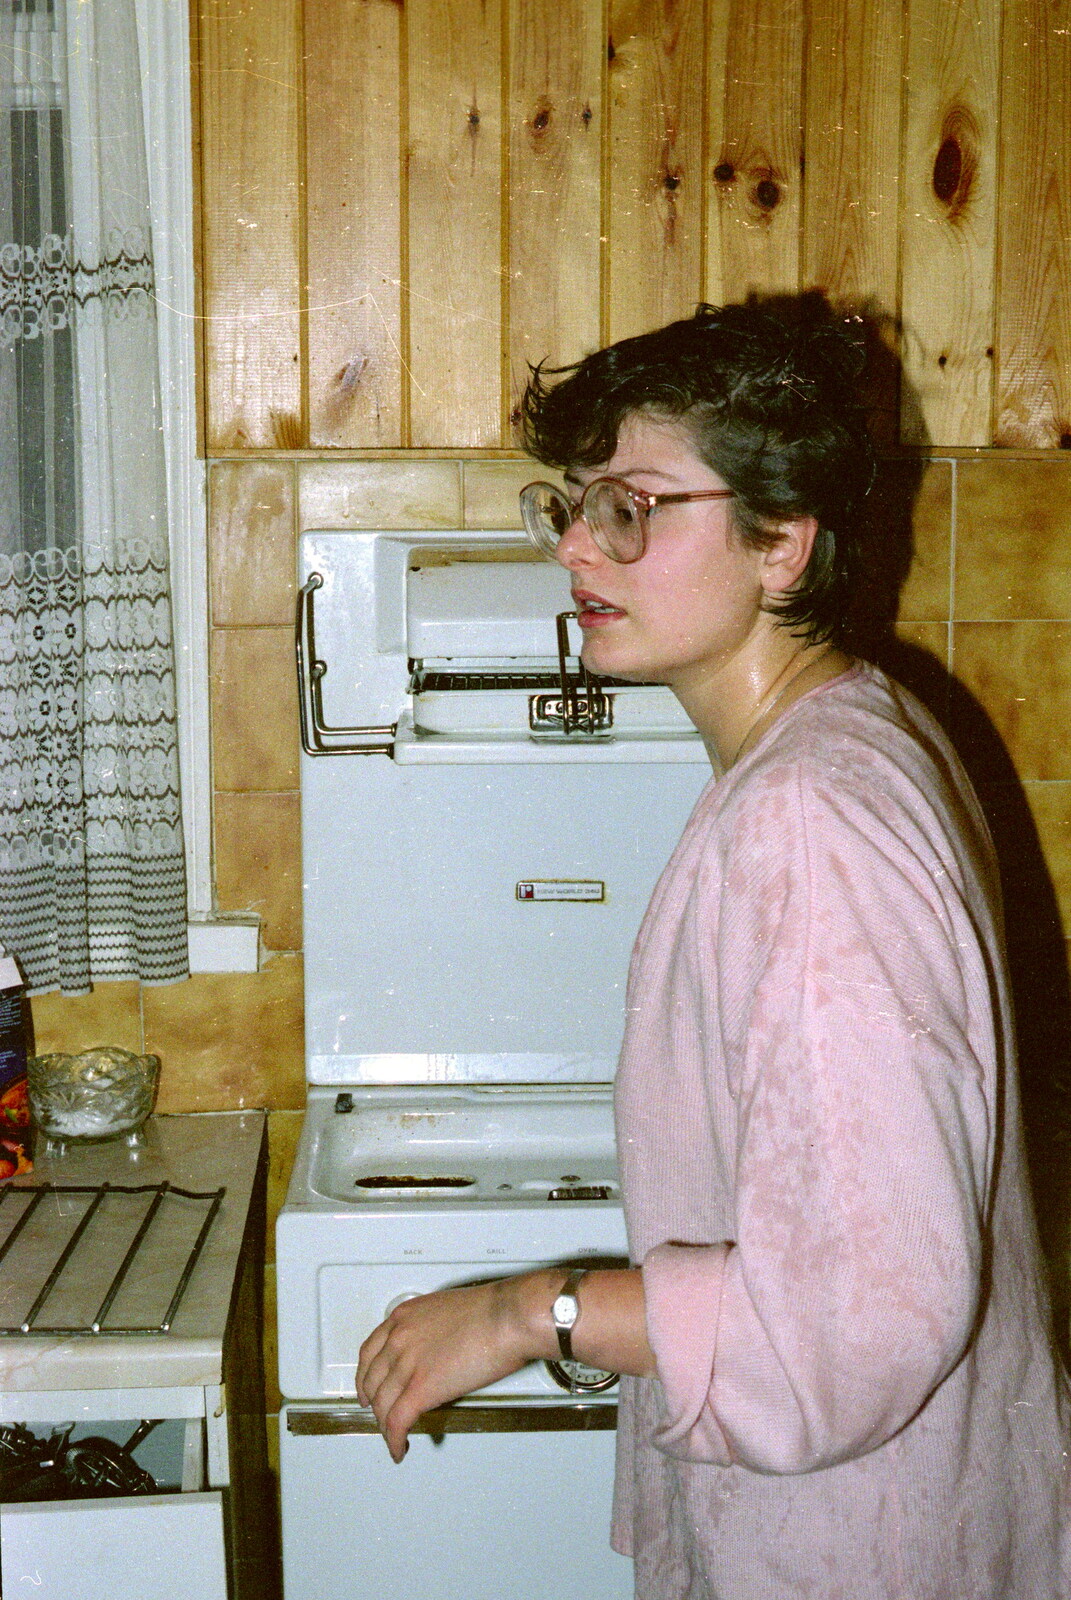 Barbara by the cooker from Uni: Beaumont Street Decorations and Water Fight, Plymouth - 14th December 1985